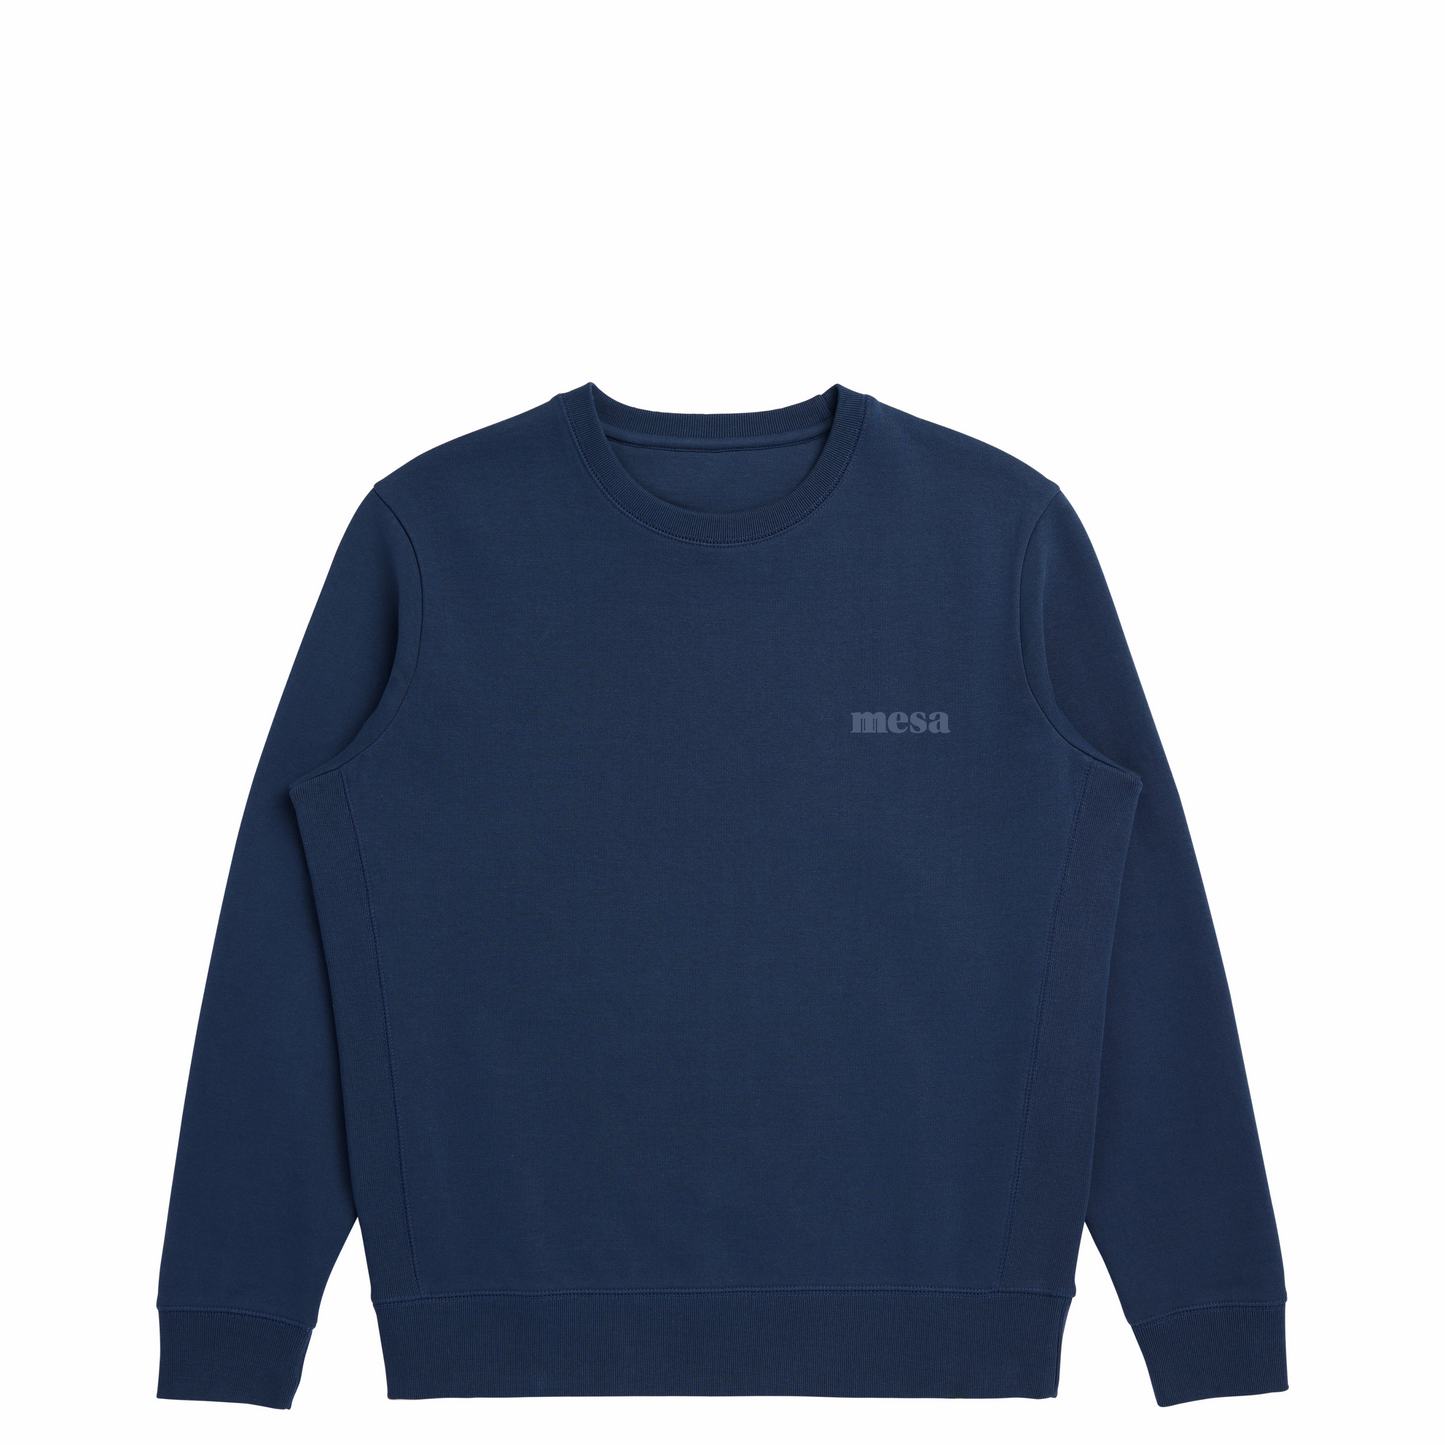 high quality navy crewneck with navy embroidery